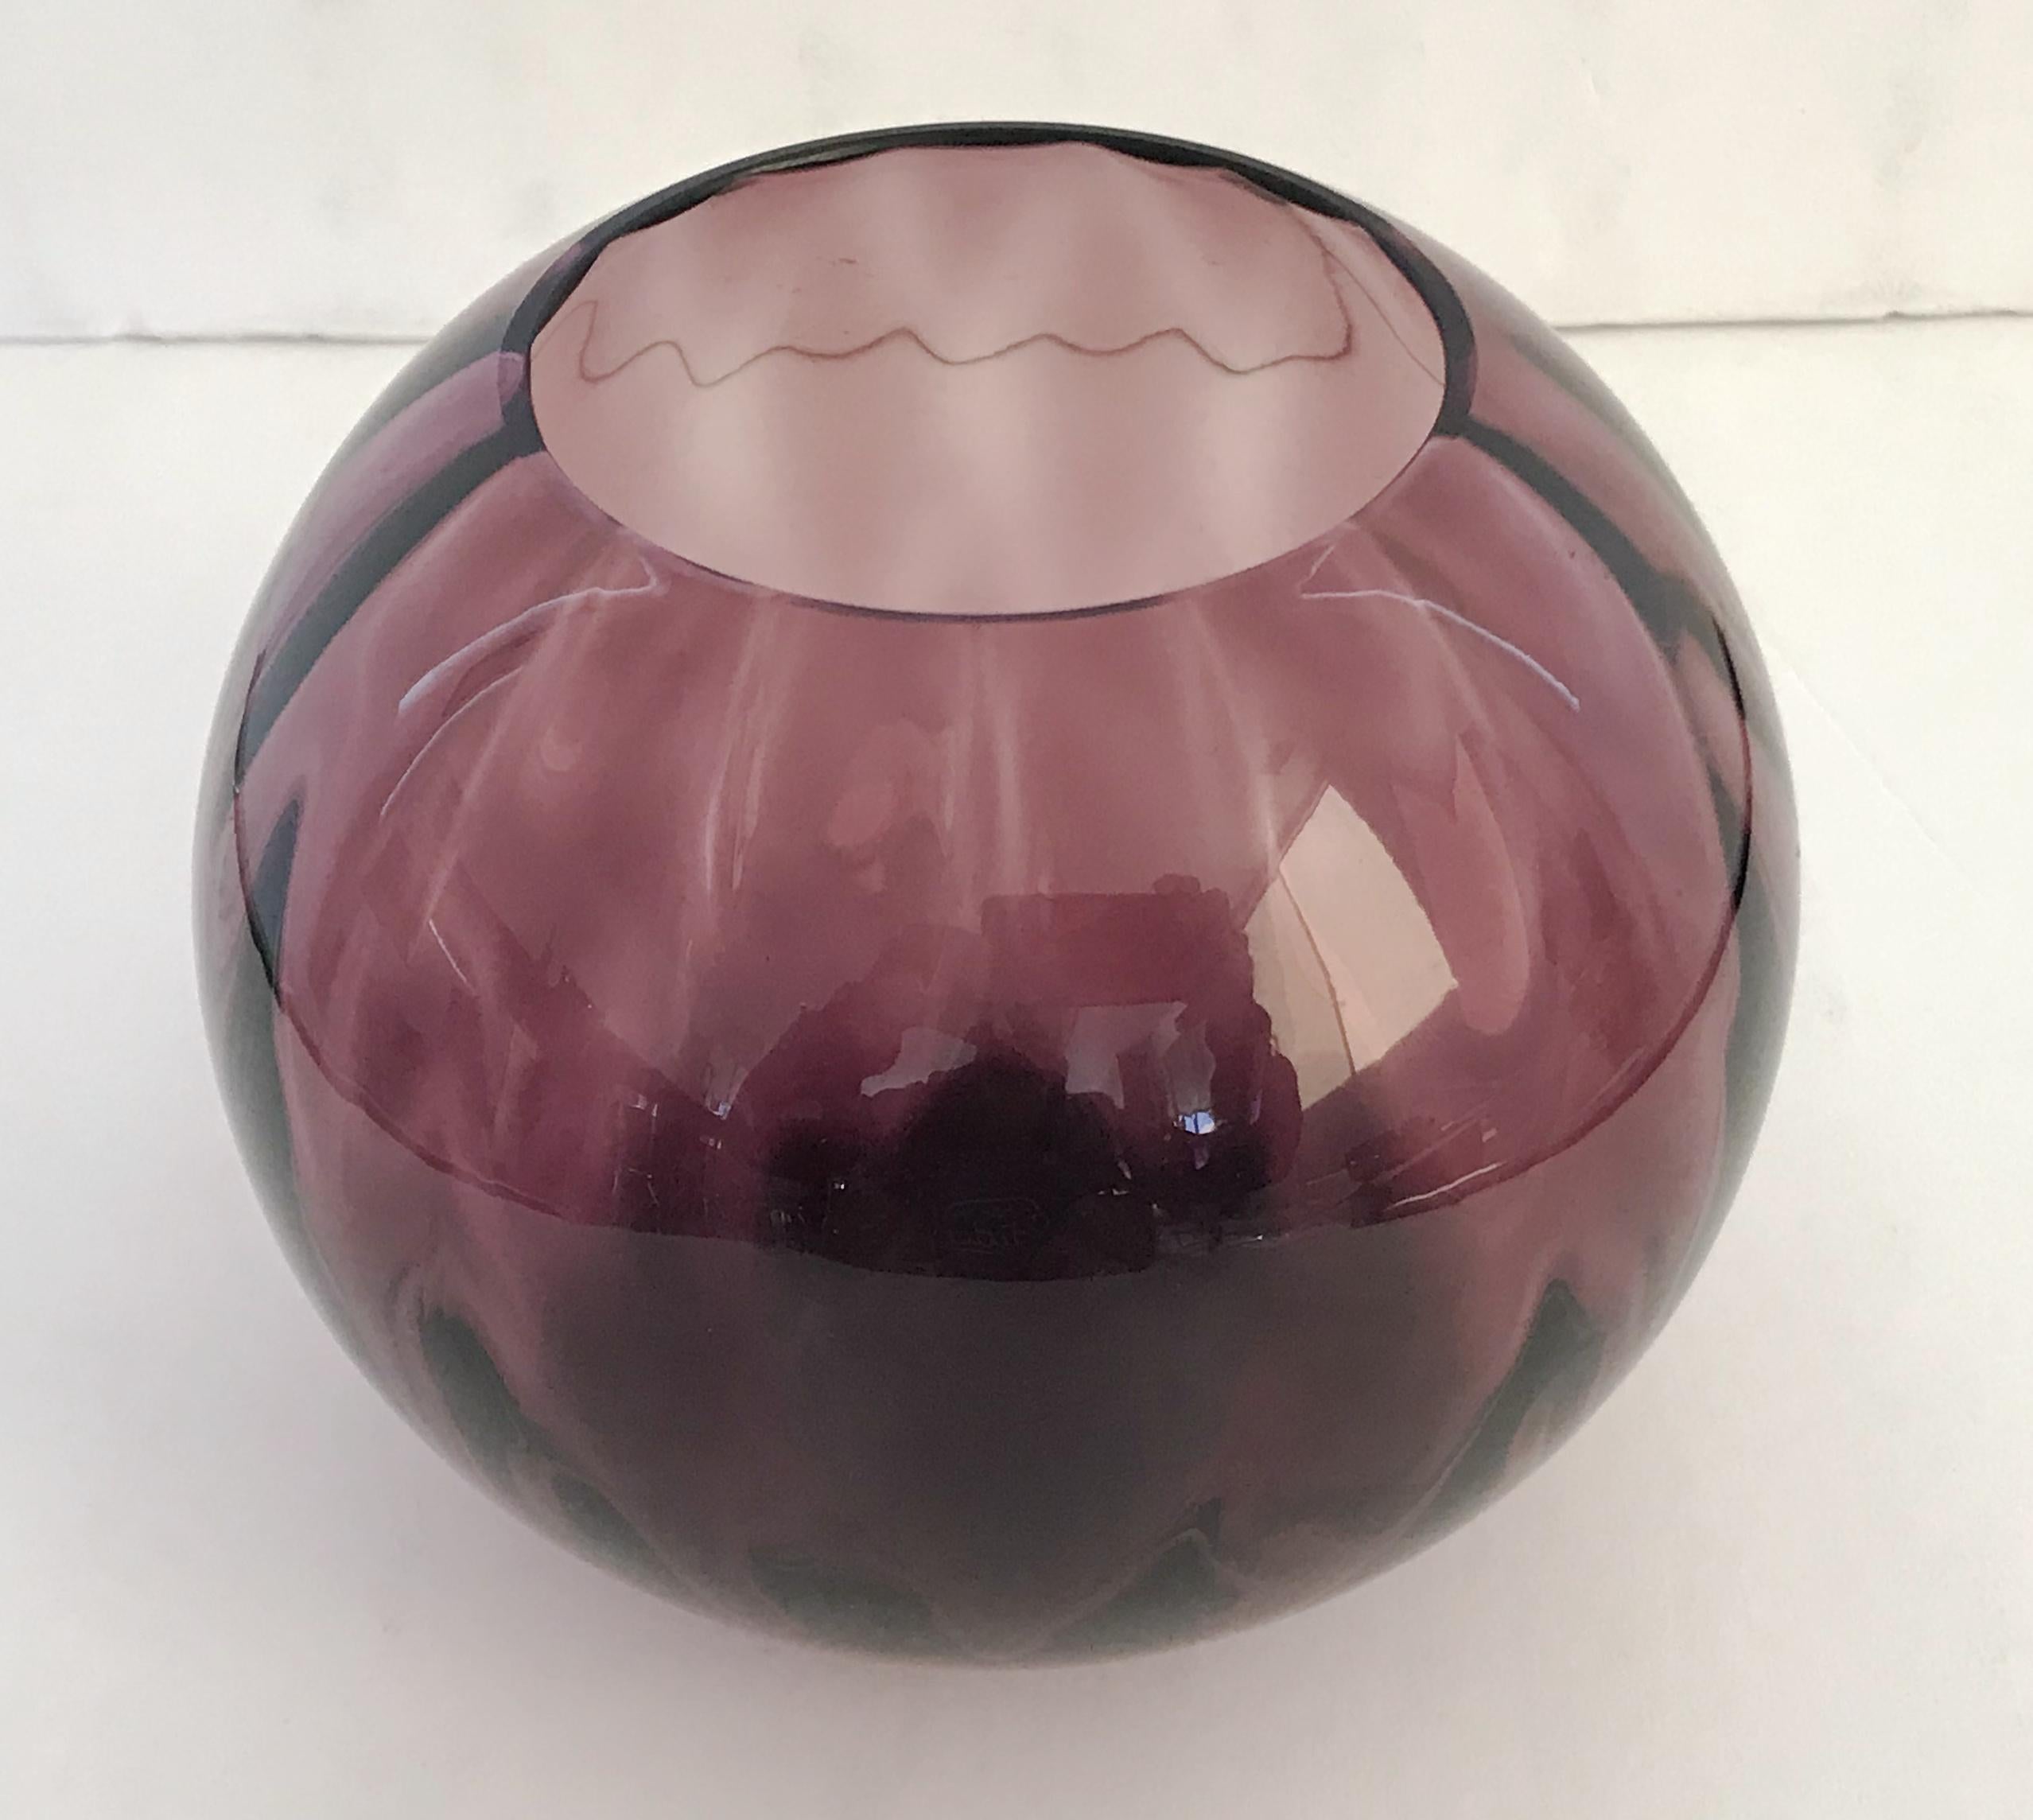 Italian amethyst Murano glass bowl / Made in Italy, circa 1960s
Measures: diameter 5.5 inches, height 5 inches, opening 3 inches
1 available in stock in Palm Springs on FINAL CLEARANCE SALE for $199 !
Order reference #: FABIOLTD G172
This piece